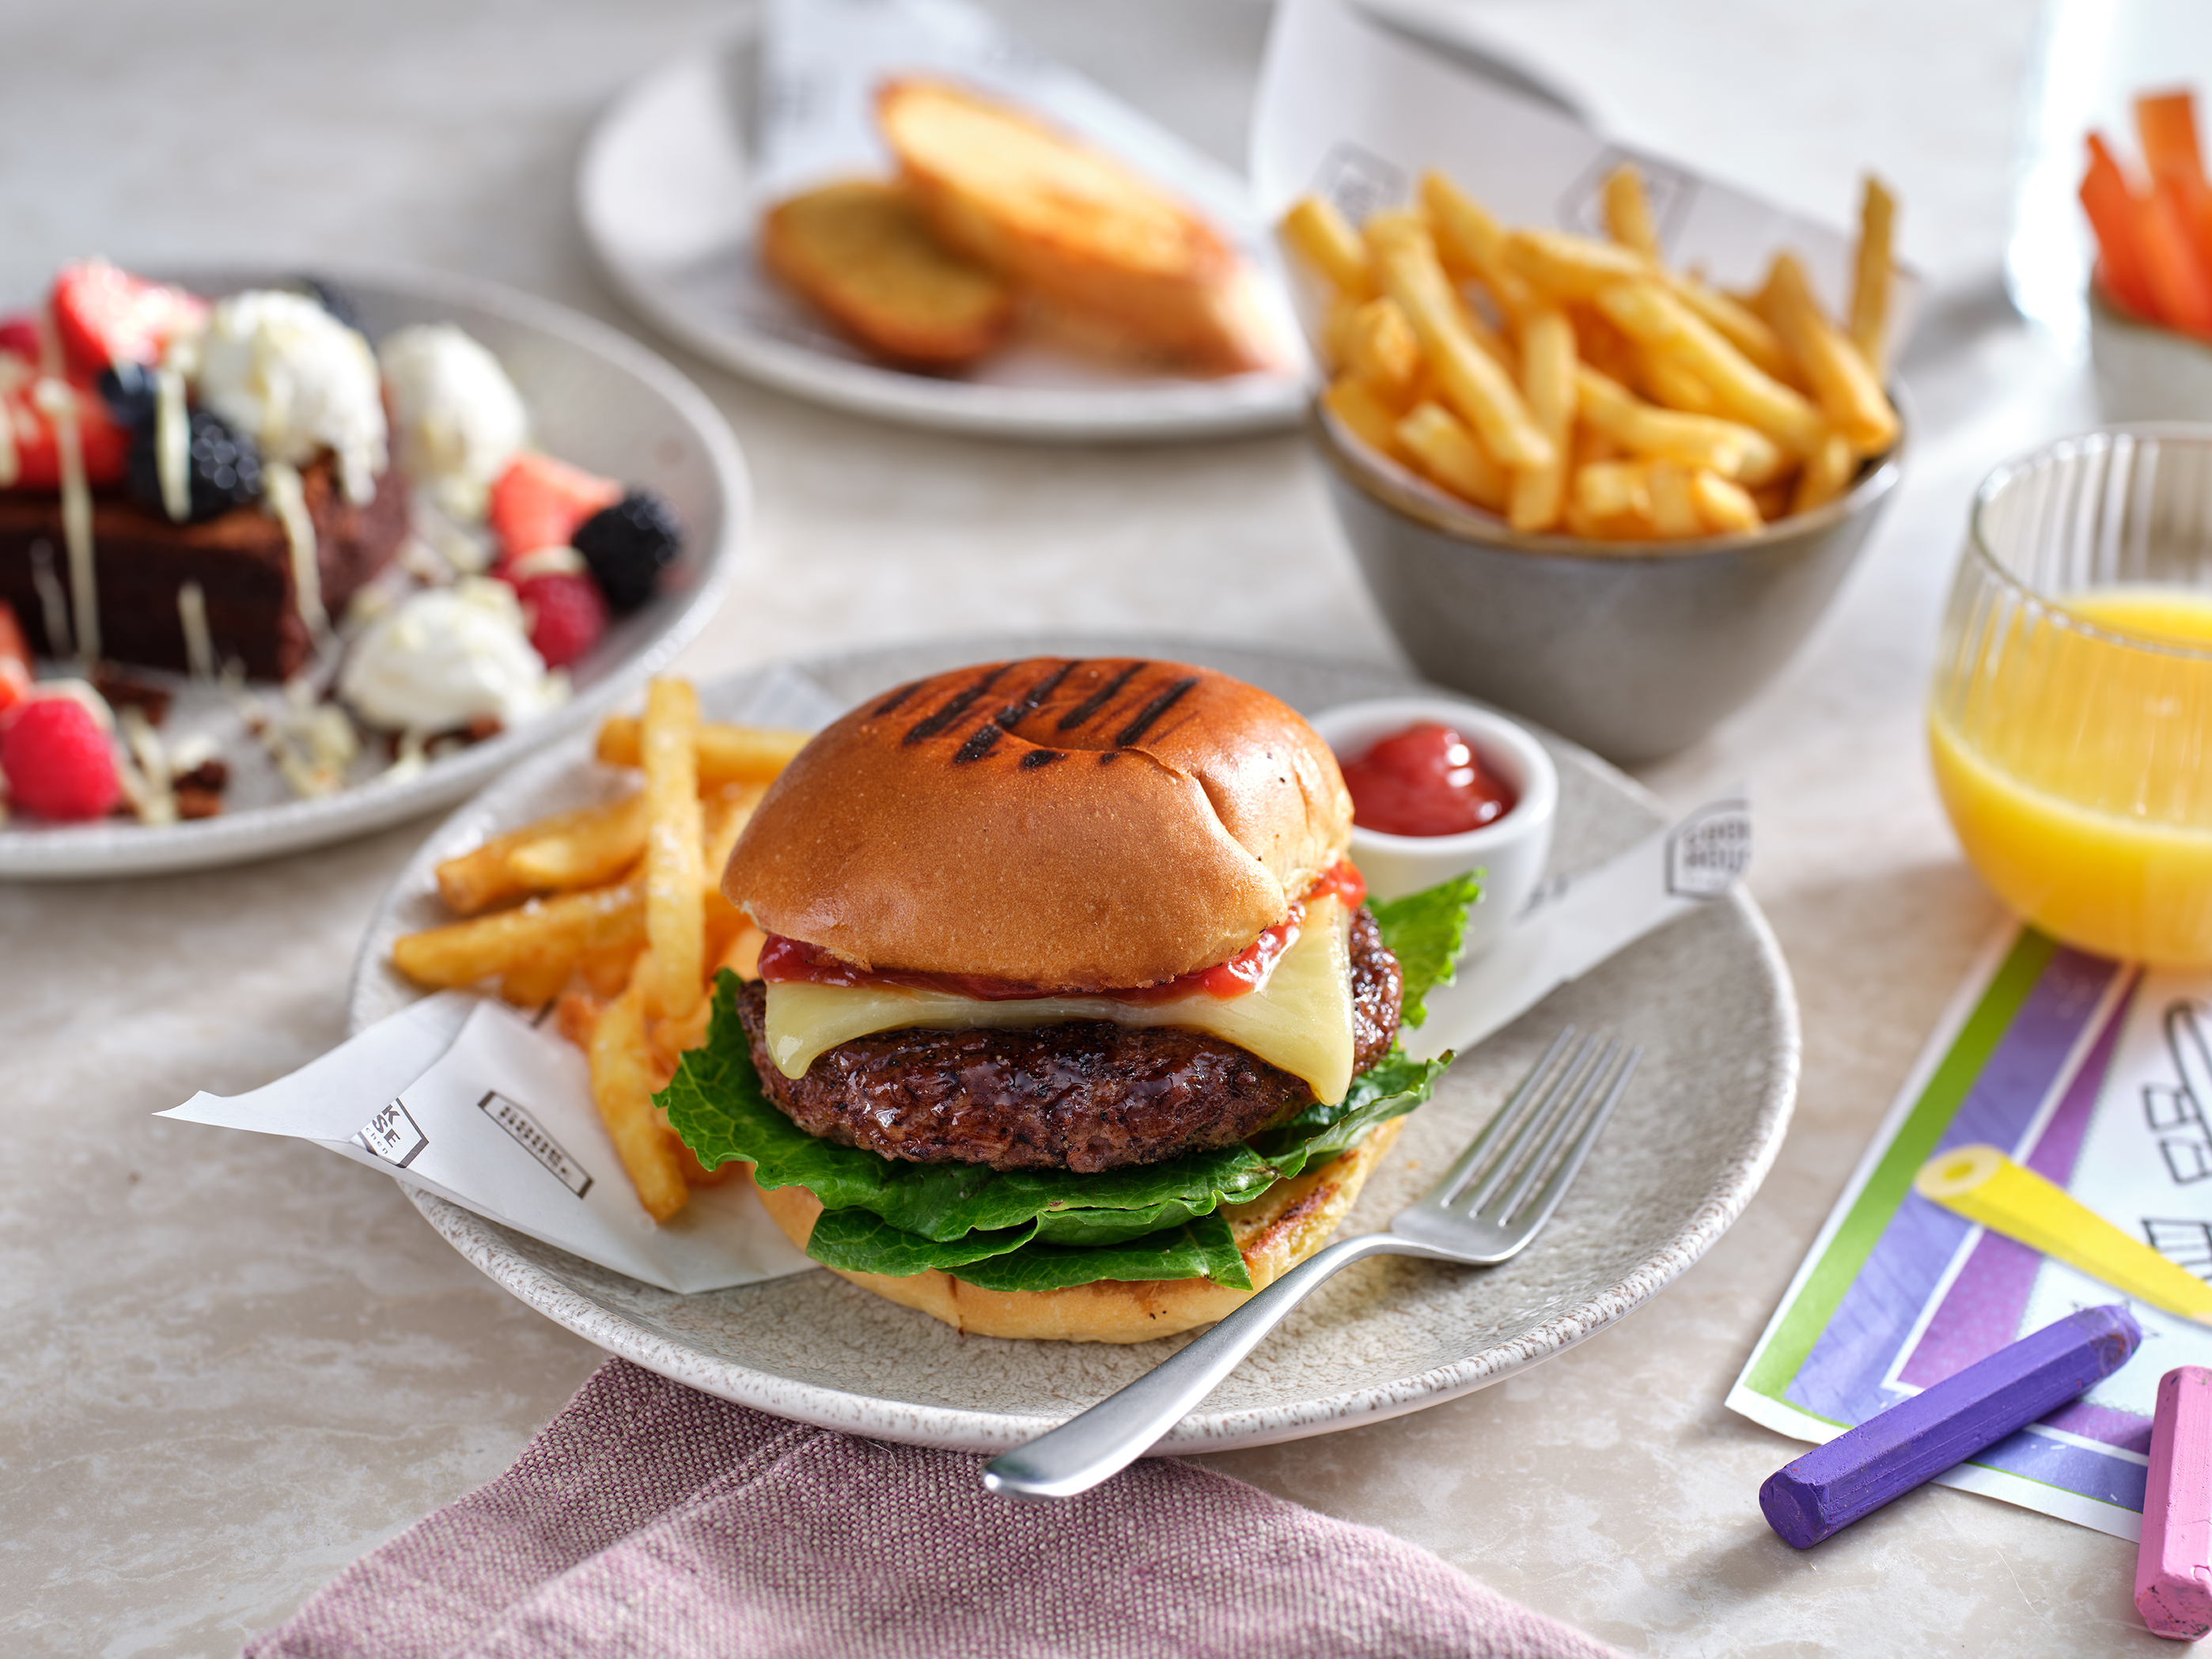 A 4oz beef burger in a bread bun with lettuce and cheese sits on a plate with skinny fries and a small pot of tomato ketchup. A small bowl of fries can be seen in the back right along with a short glass of orange juice and to the back right a chocolate brownie sits on a plate (out of focus).